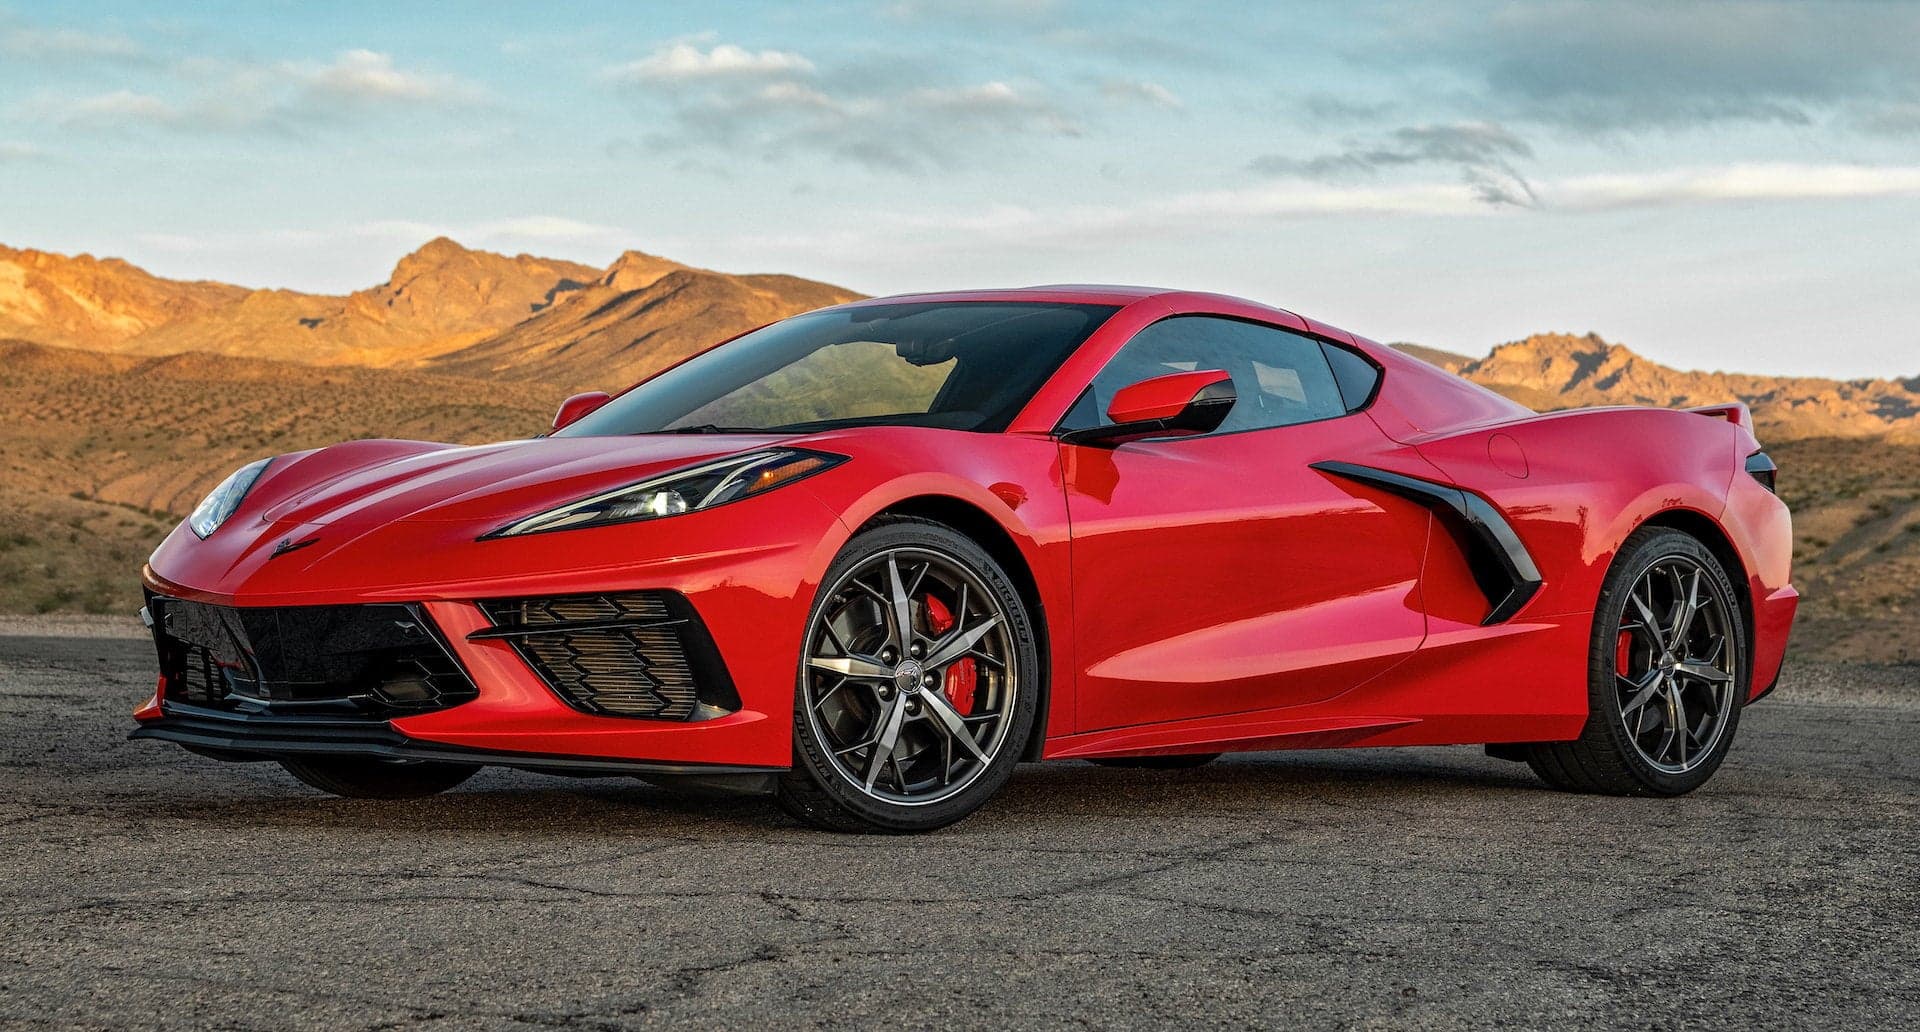 2022 Chevy Corvette Z06 Will Offer Active Aero and Carbon Fiber Wheels: Report